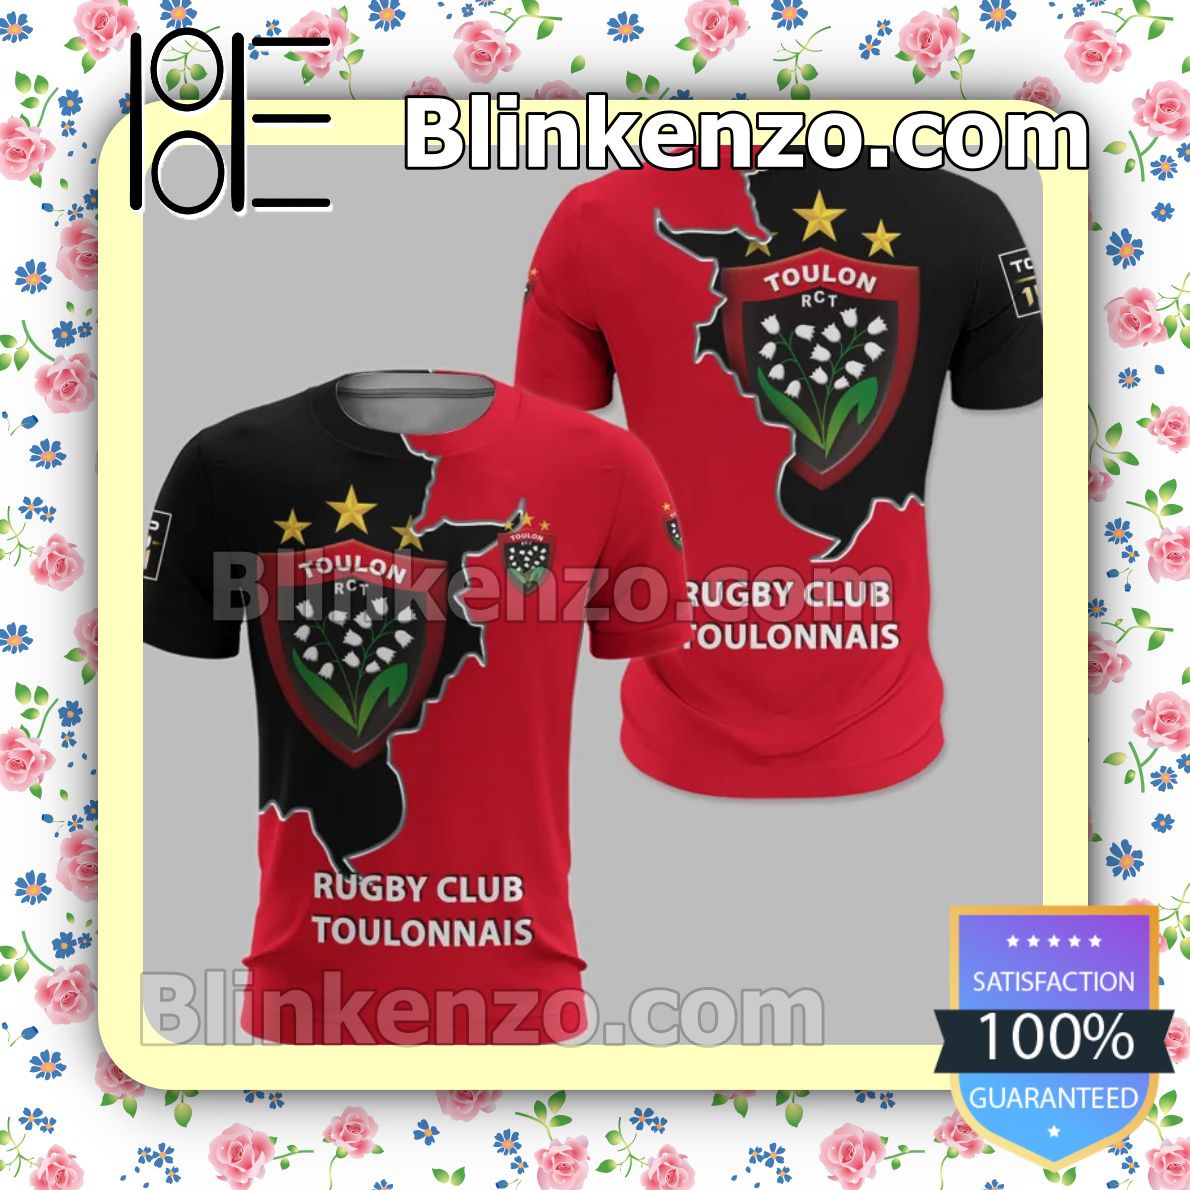 Only For Fan Rugby Club Toulonnais Men T-shirt, Hooded Sweatshirt